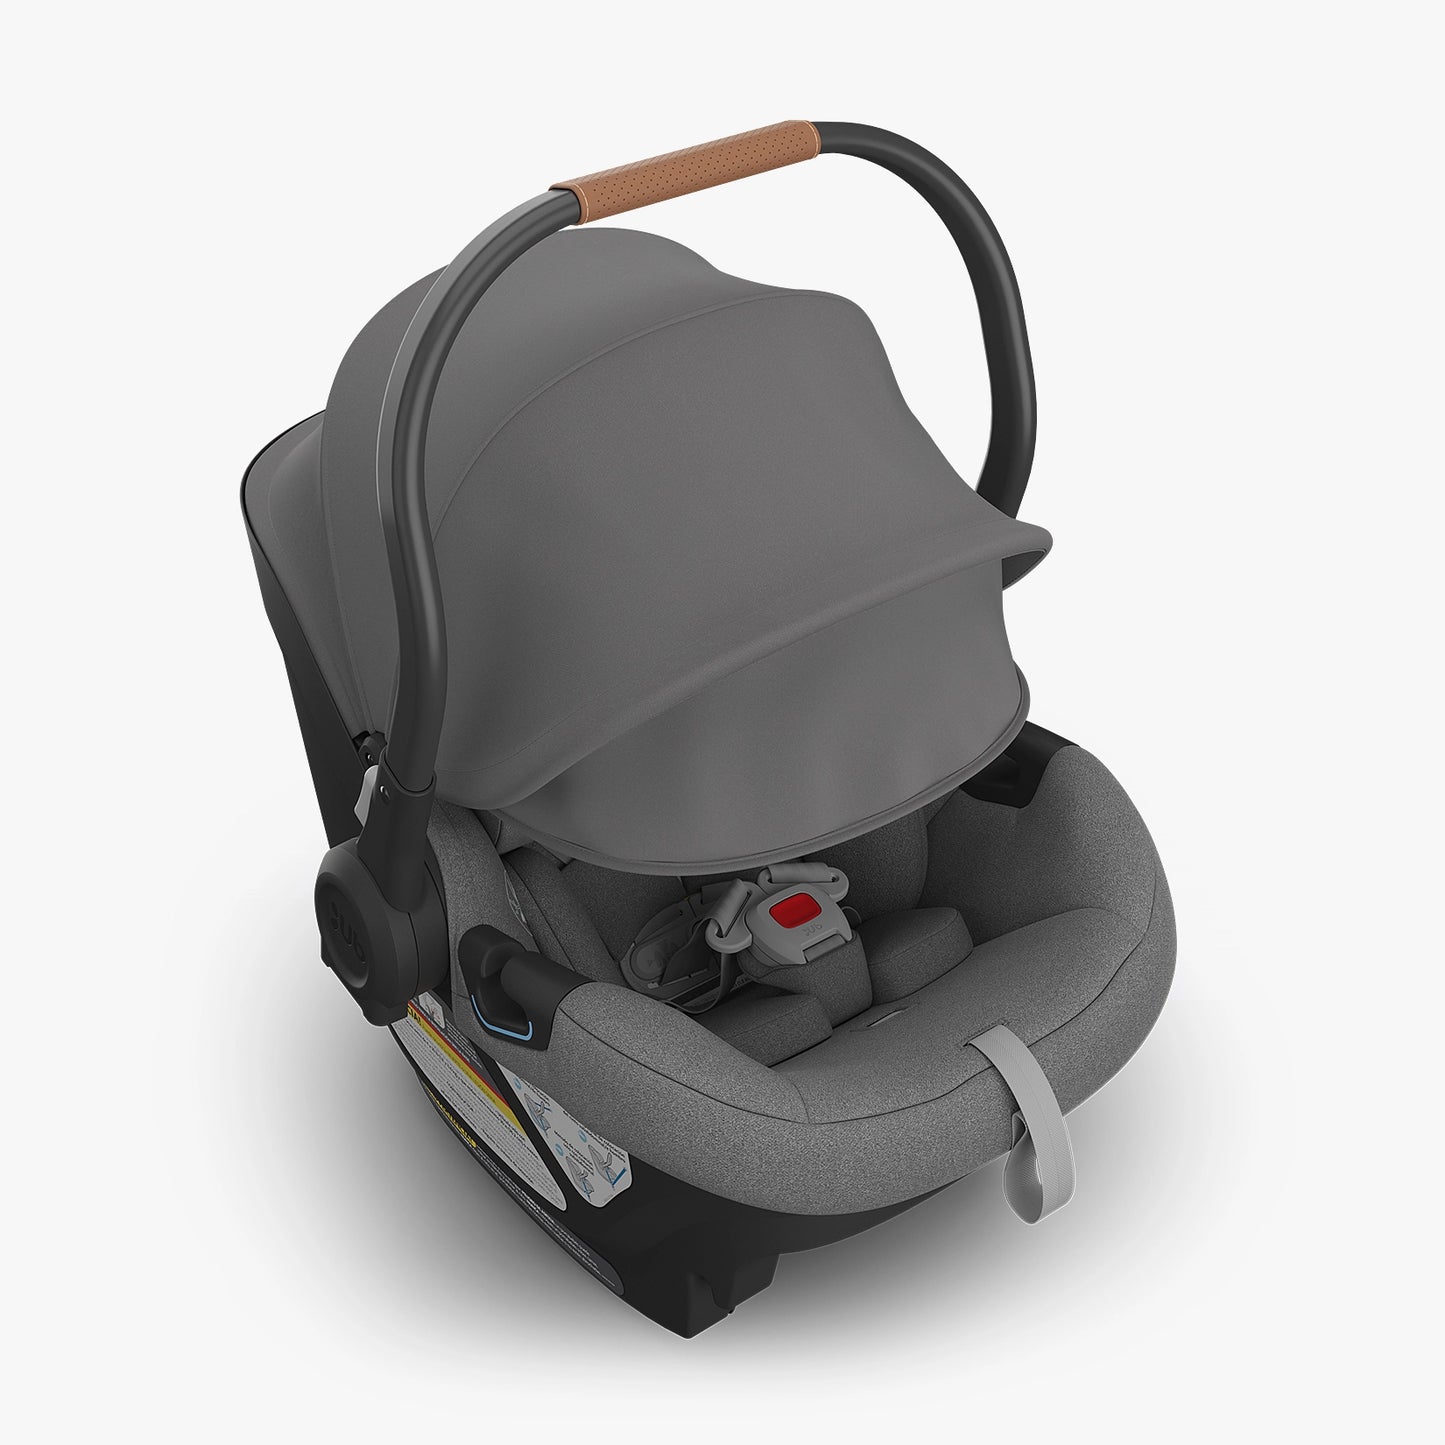 ARIA Infant Car Seat - GREYSON (BACKORDERED UNTIL JUNE)  - DROPSHIP ITEM - PLEASE ALLOW ONE WEEK FOR PROCESSING